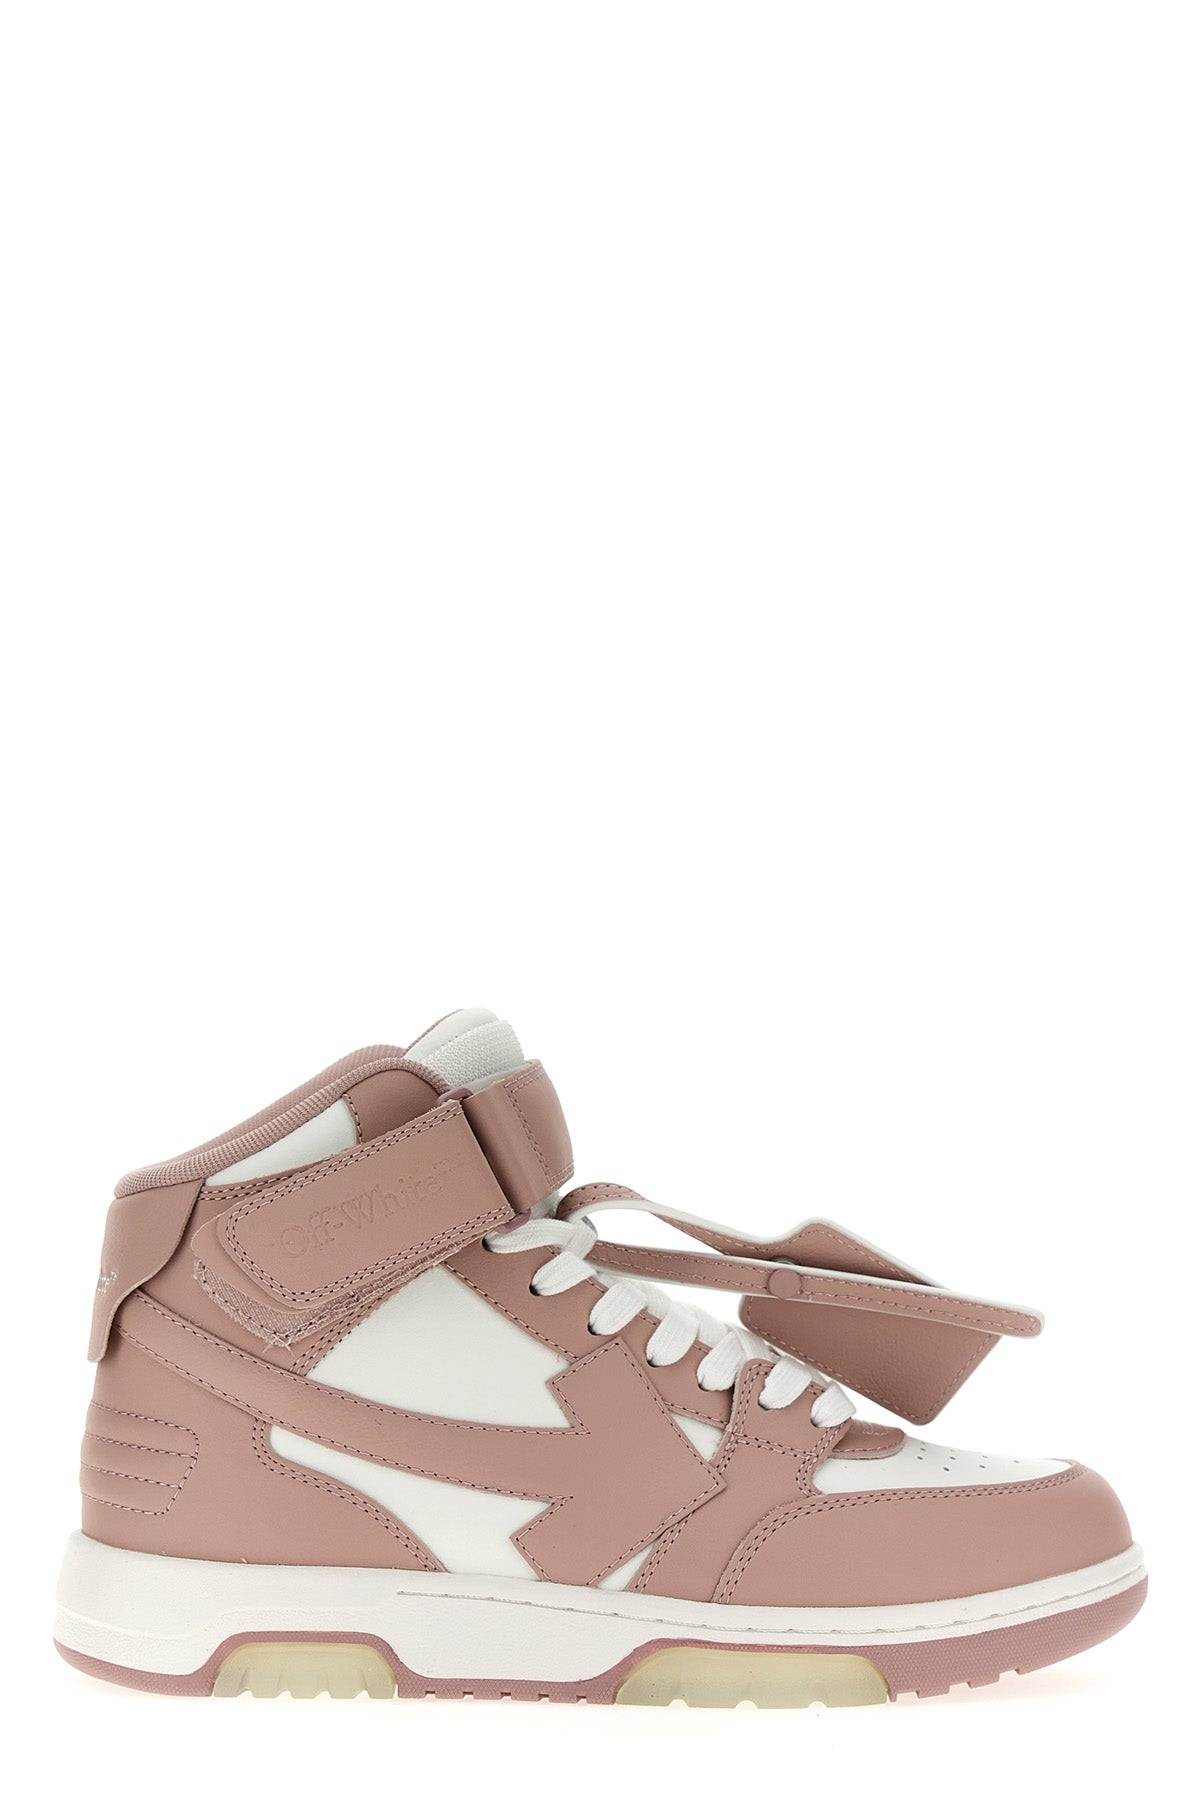 OFF-WHITE 'OUT OF OFFICE MID TOP LEA' SNEAKERS